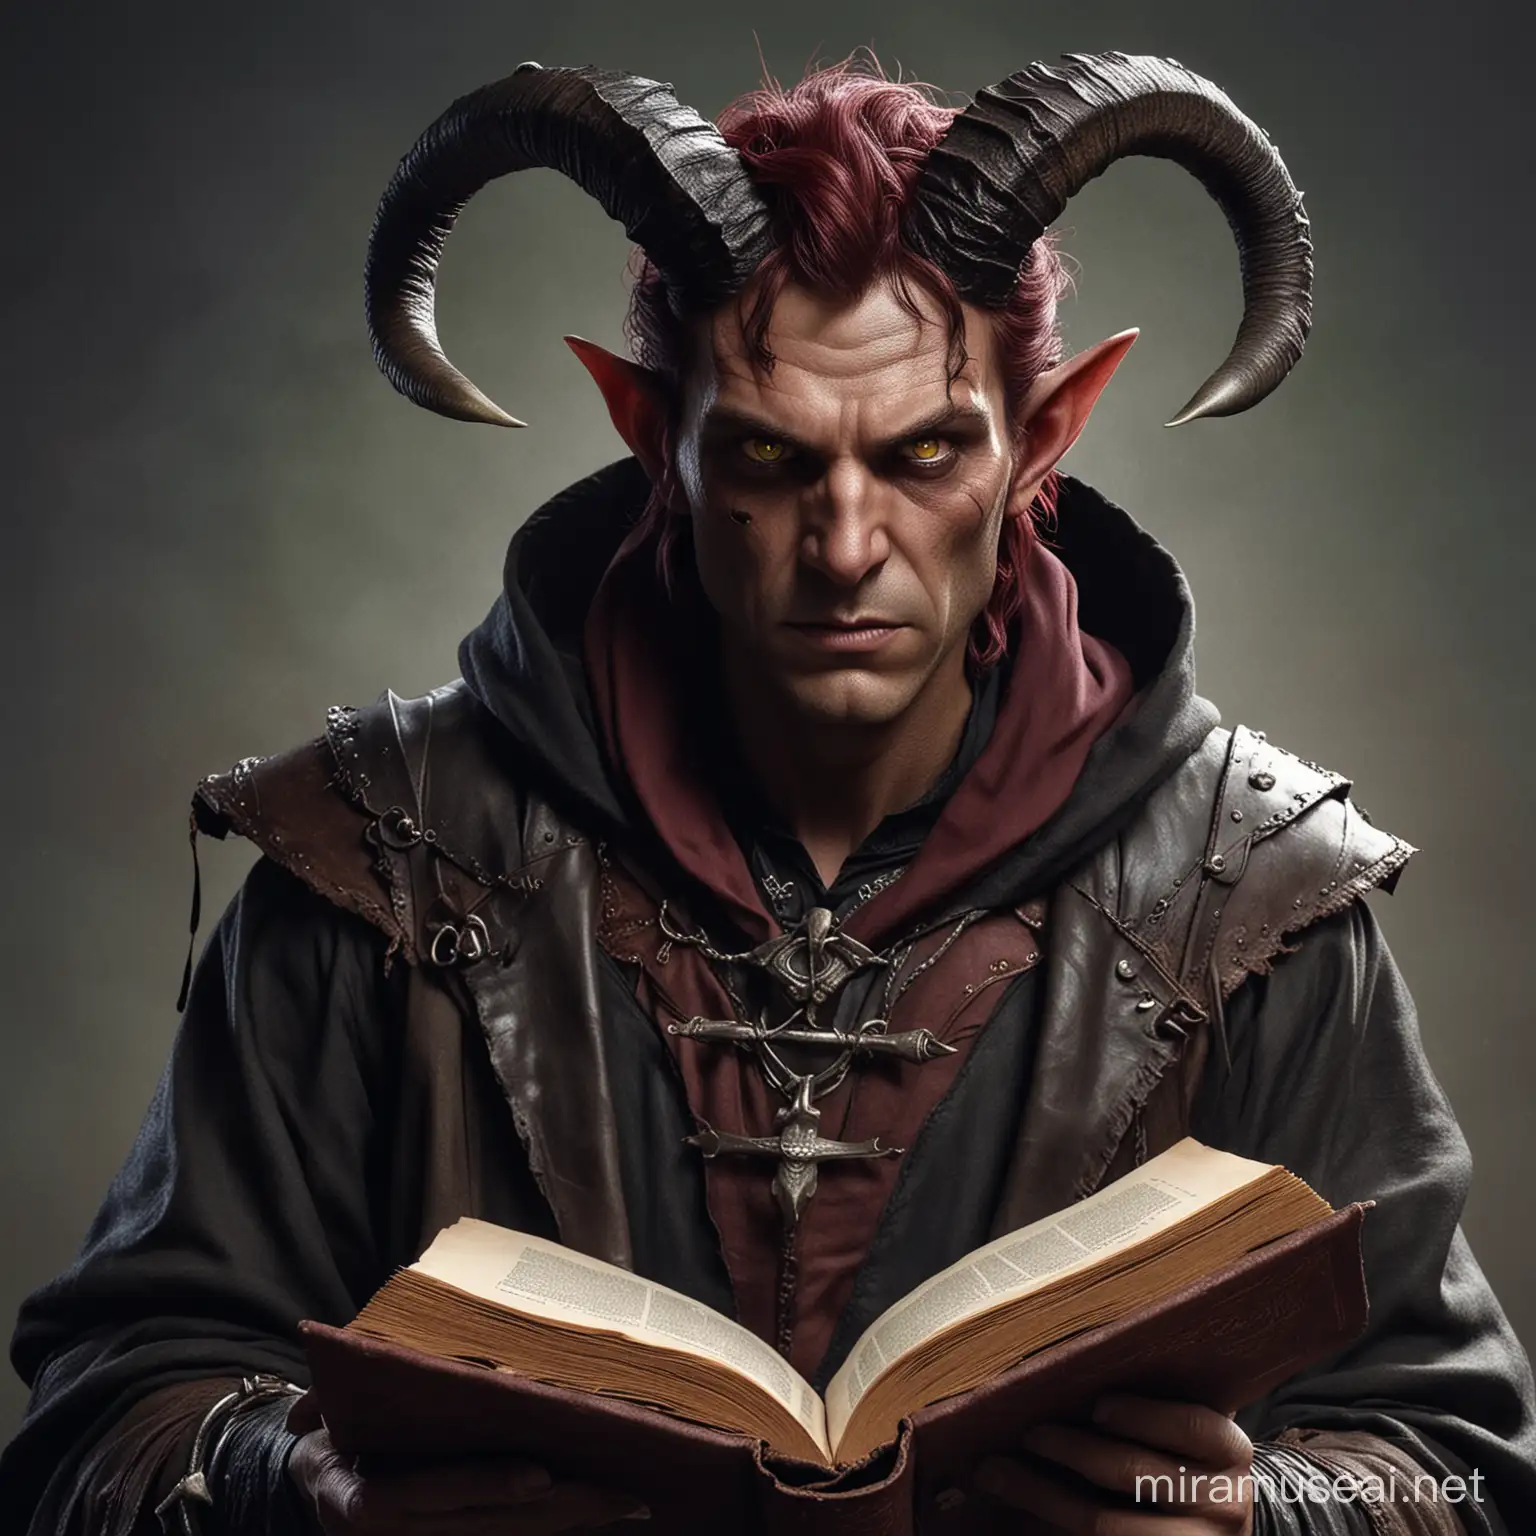 Make a movie character image for Skamos, he has the following characteristics: 

-is an old tiefling (around 80 years)
-has a giant old leather tattered book with protrusions
- has a burgundy colored skin
- has a knife with an eye as a handle
-has devil like features (like horns)
- has green eyes
- wears a black cloak